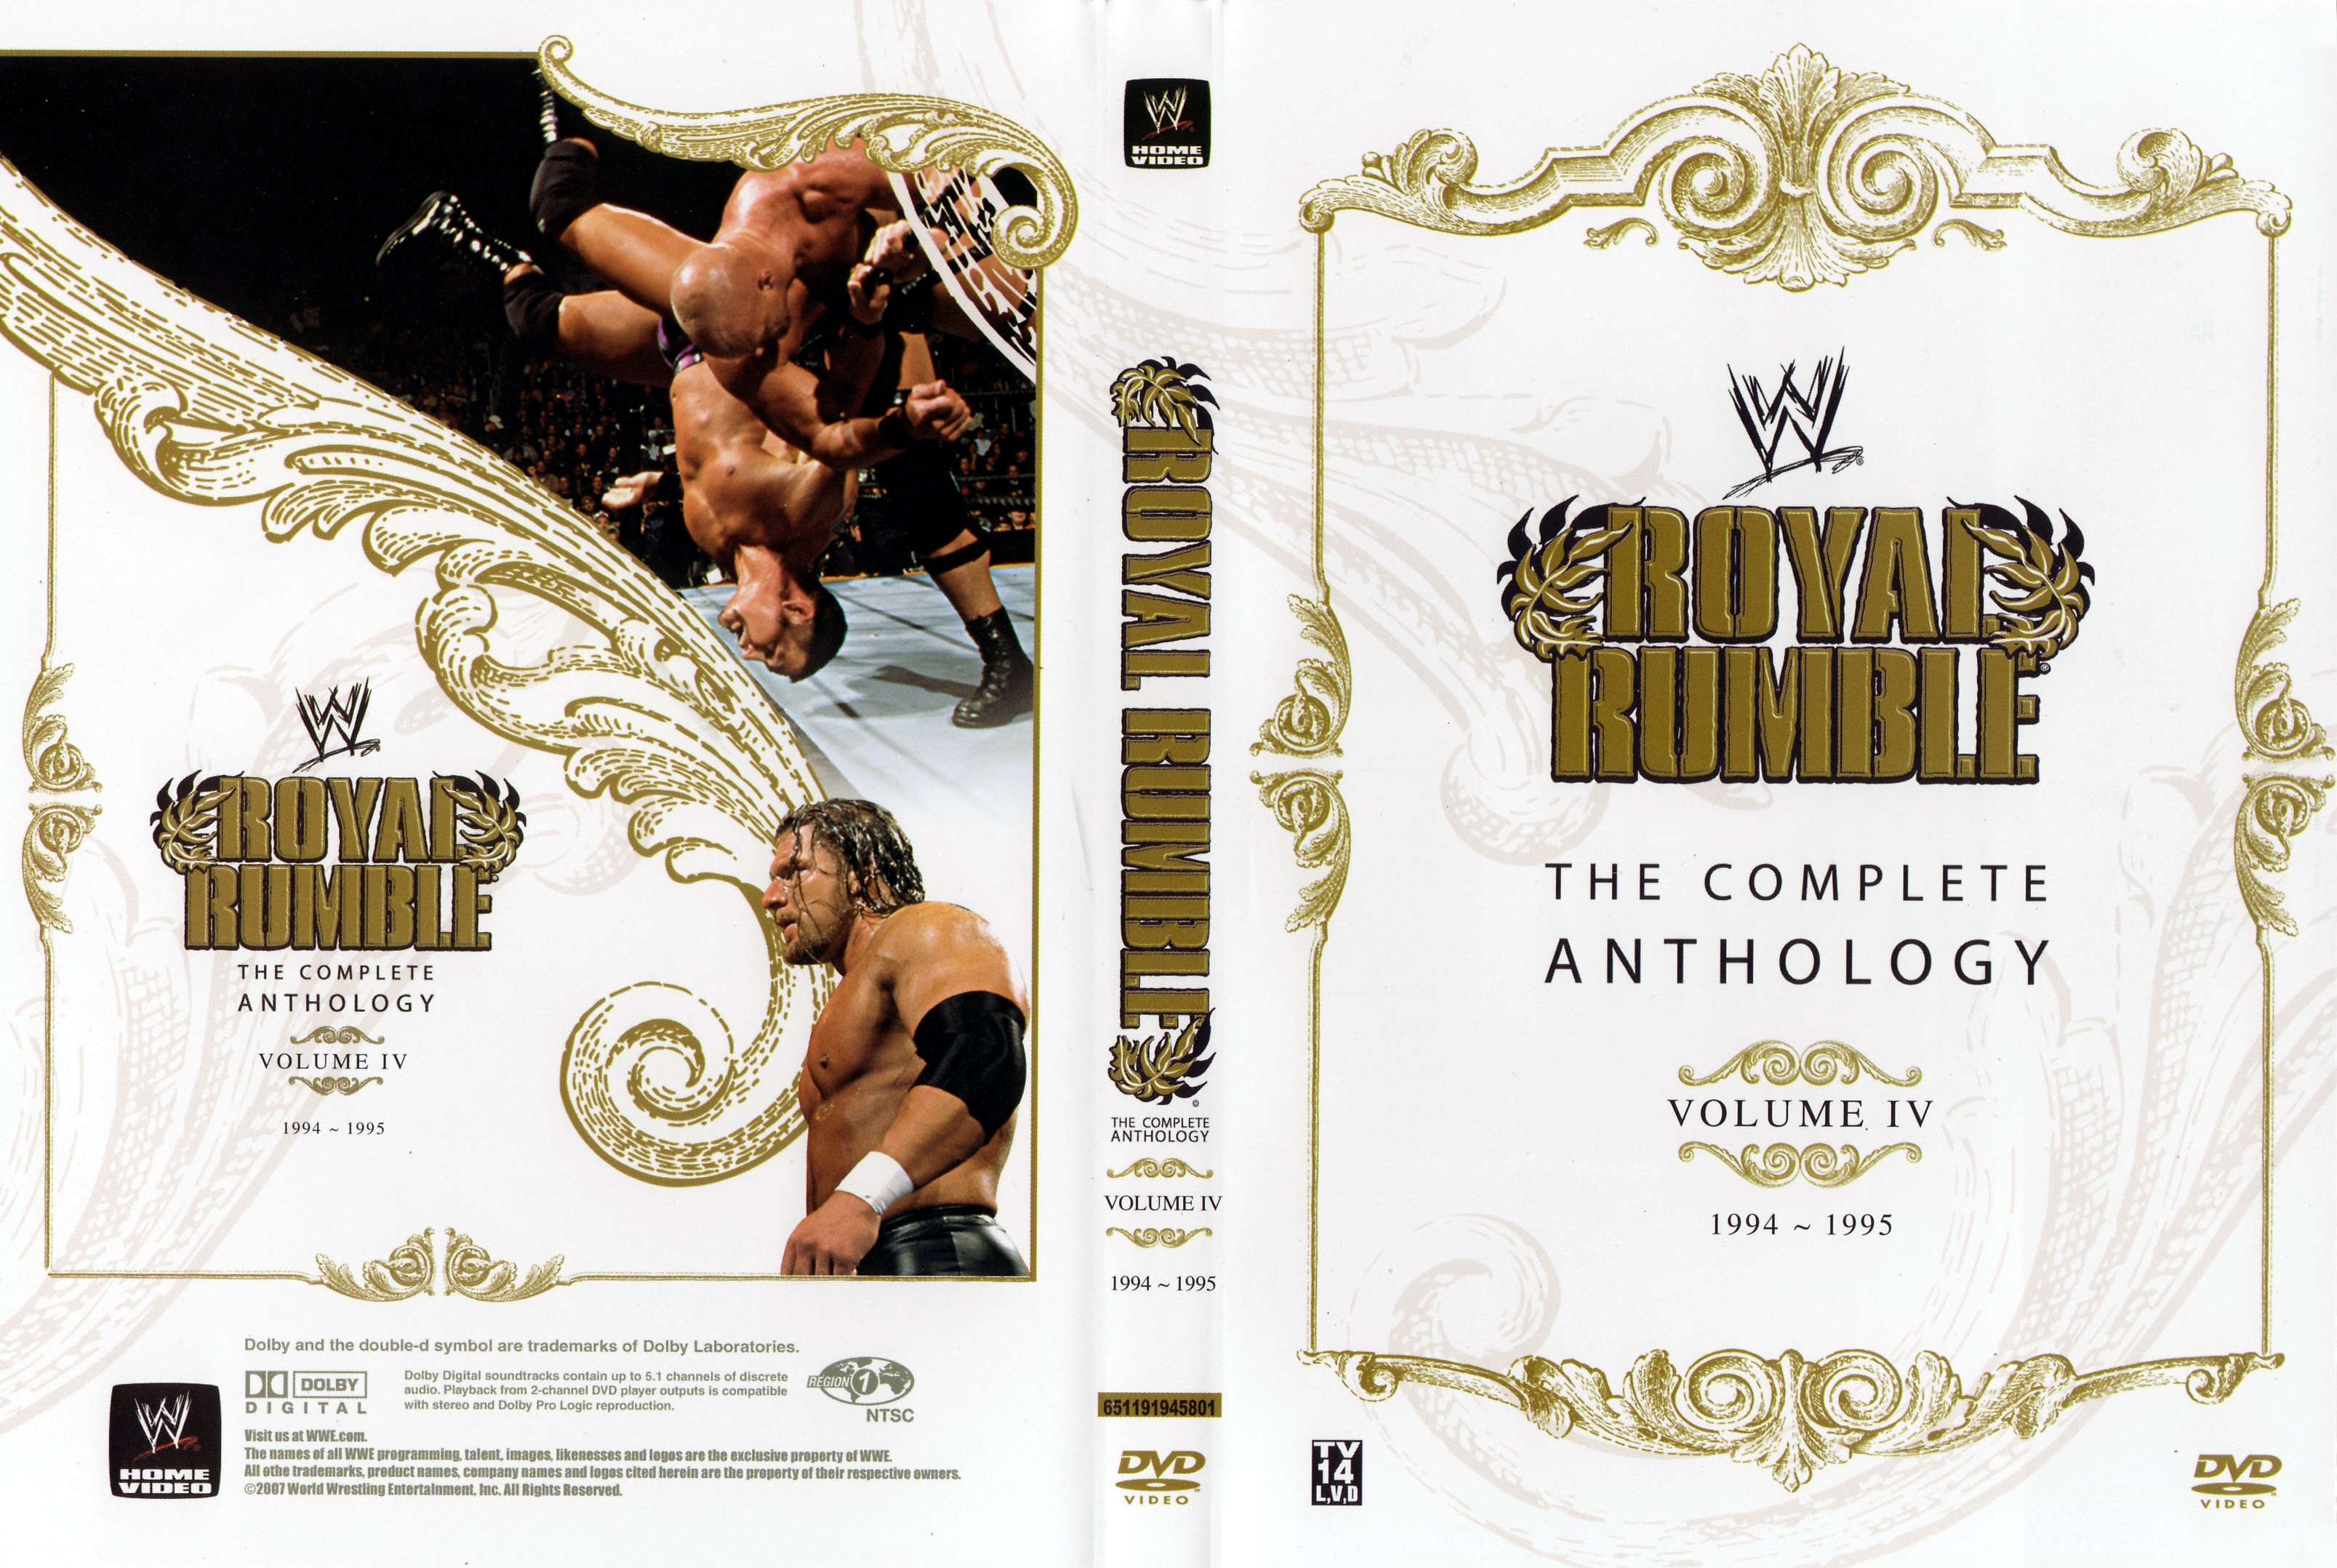 Jaquette DVD WWE Royal Rumble the complete antology vol 04